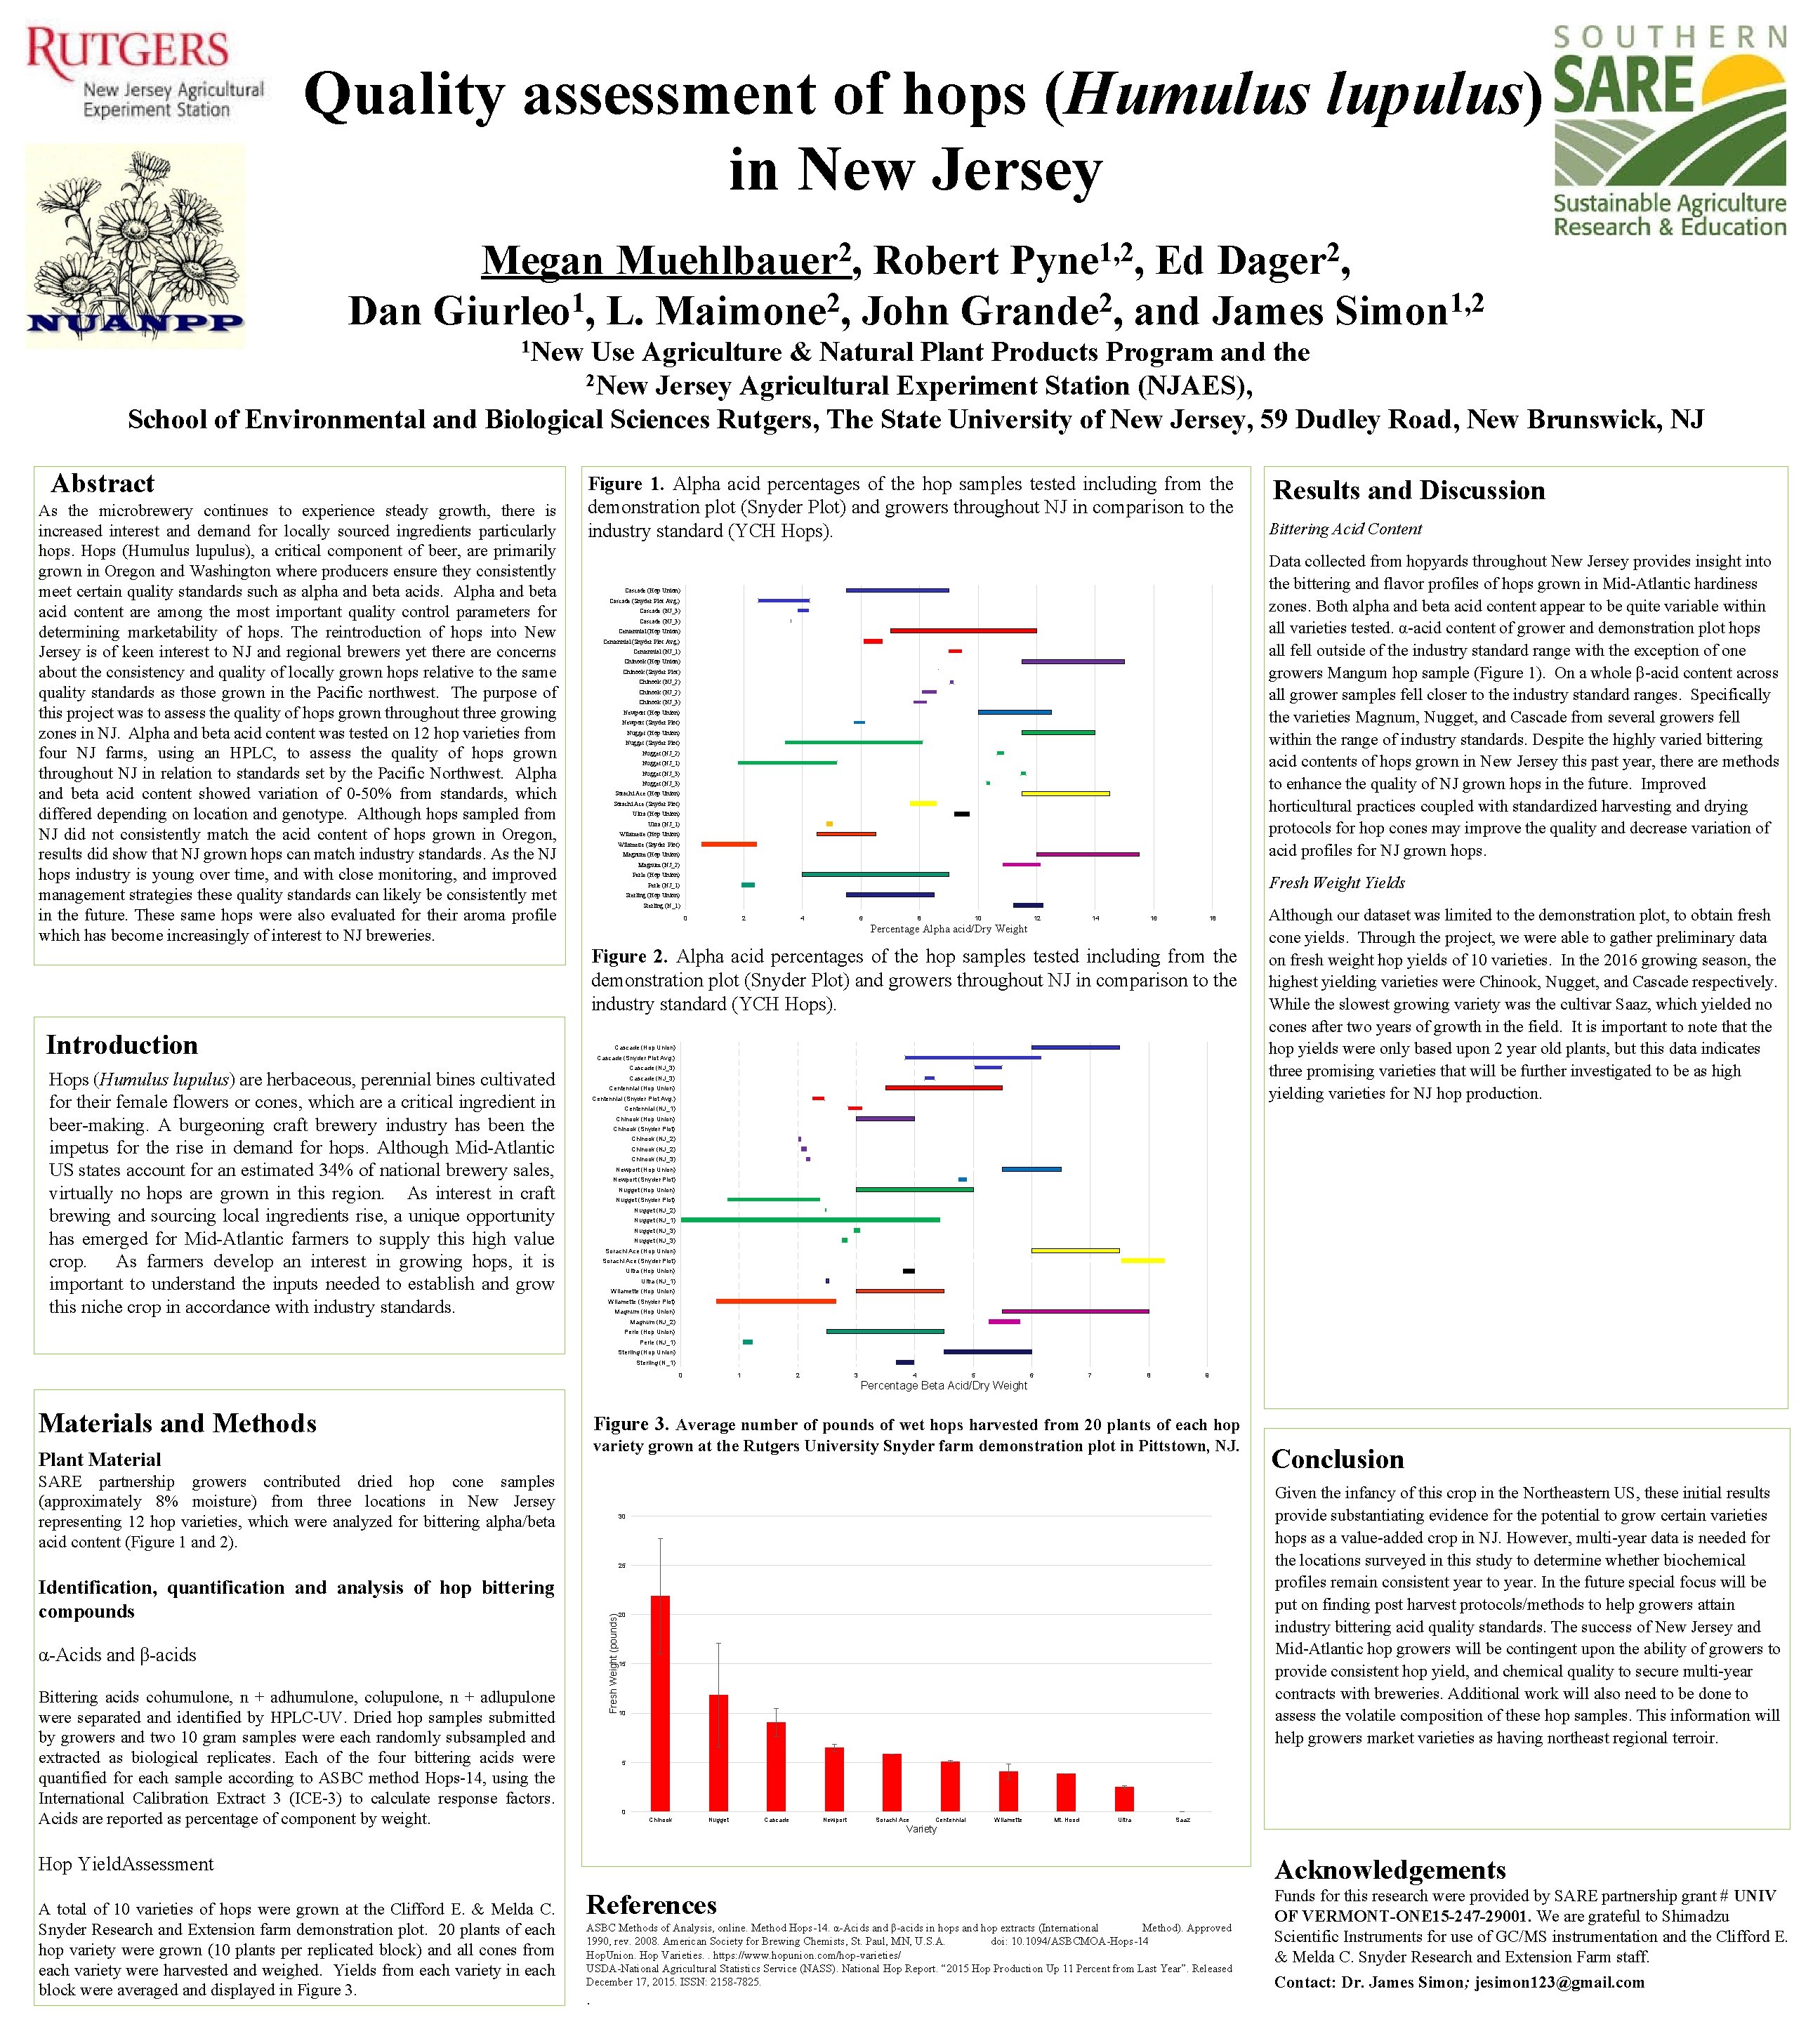 Quality assessment of hops (Humulus lupulus) grown in New Jersey 2 Muehlbauer , 1,